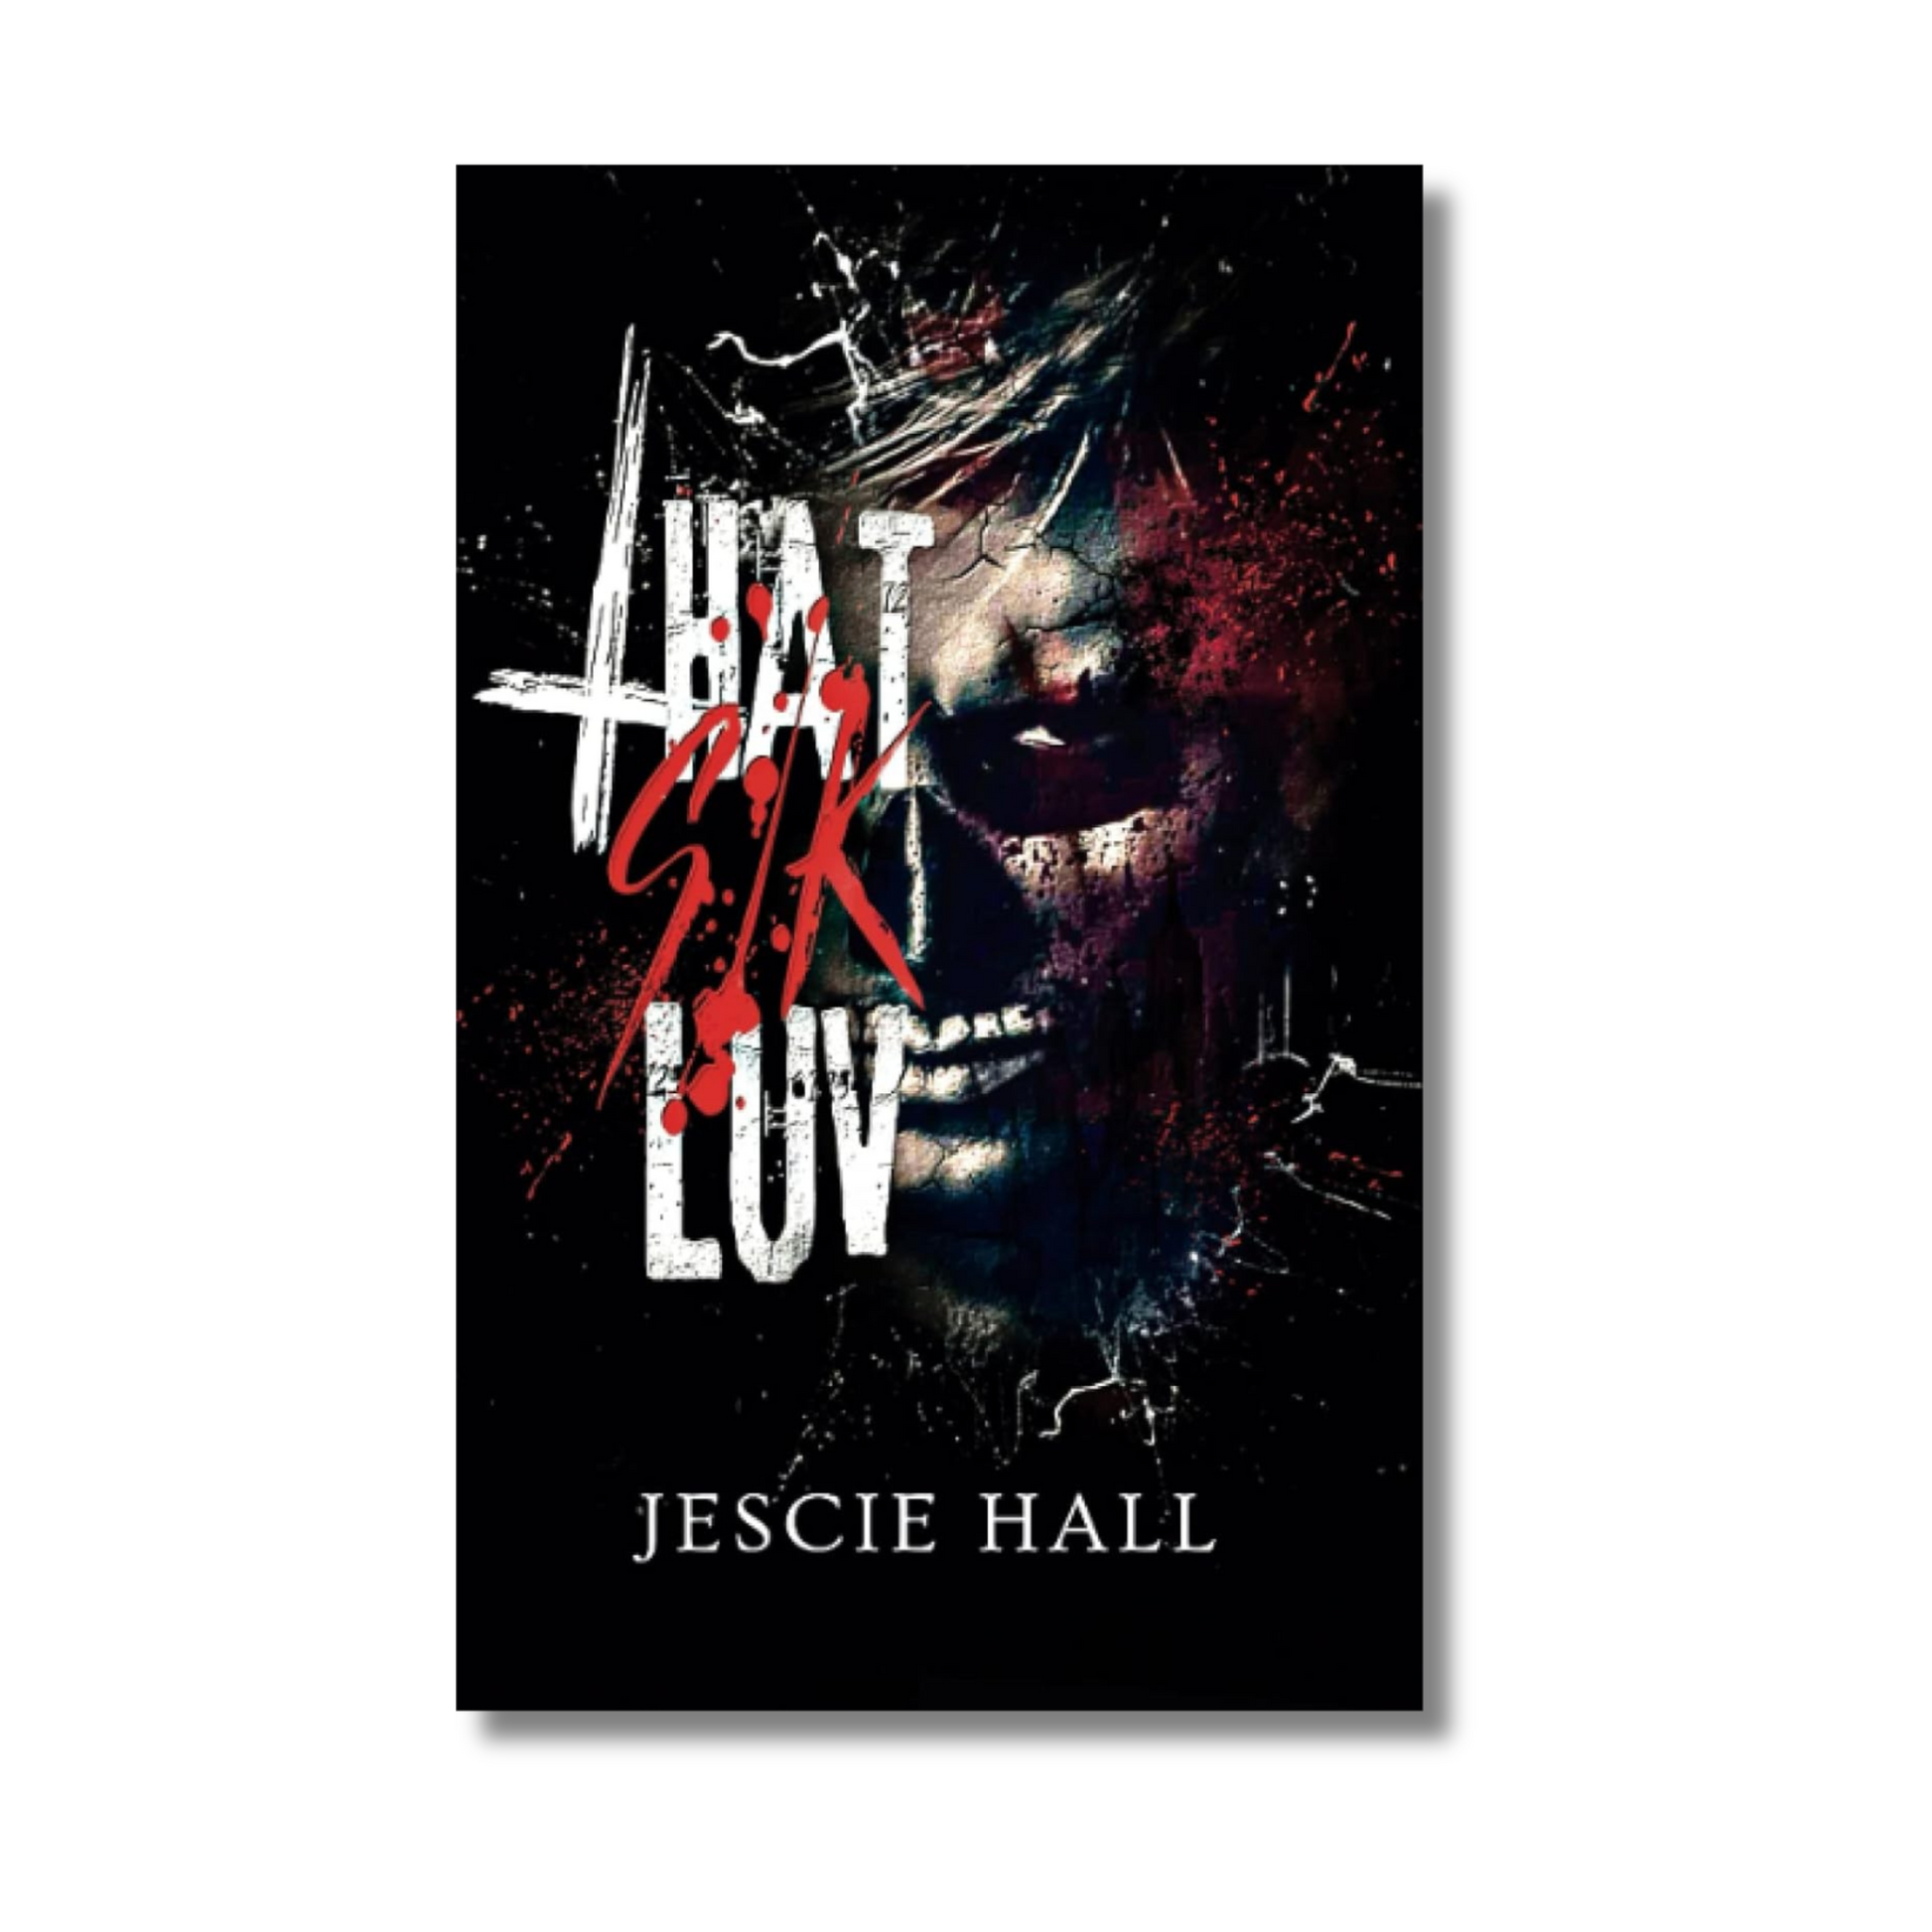 That Sik Luv By Jescie Hall (Paperback) - Gyaanstore